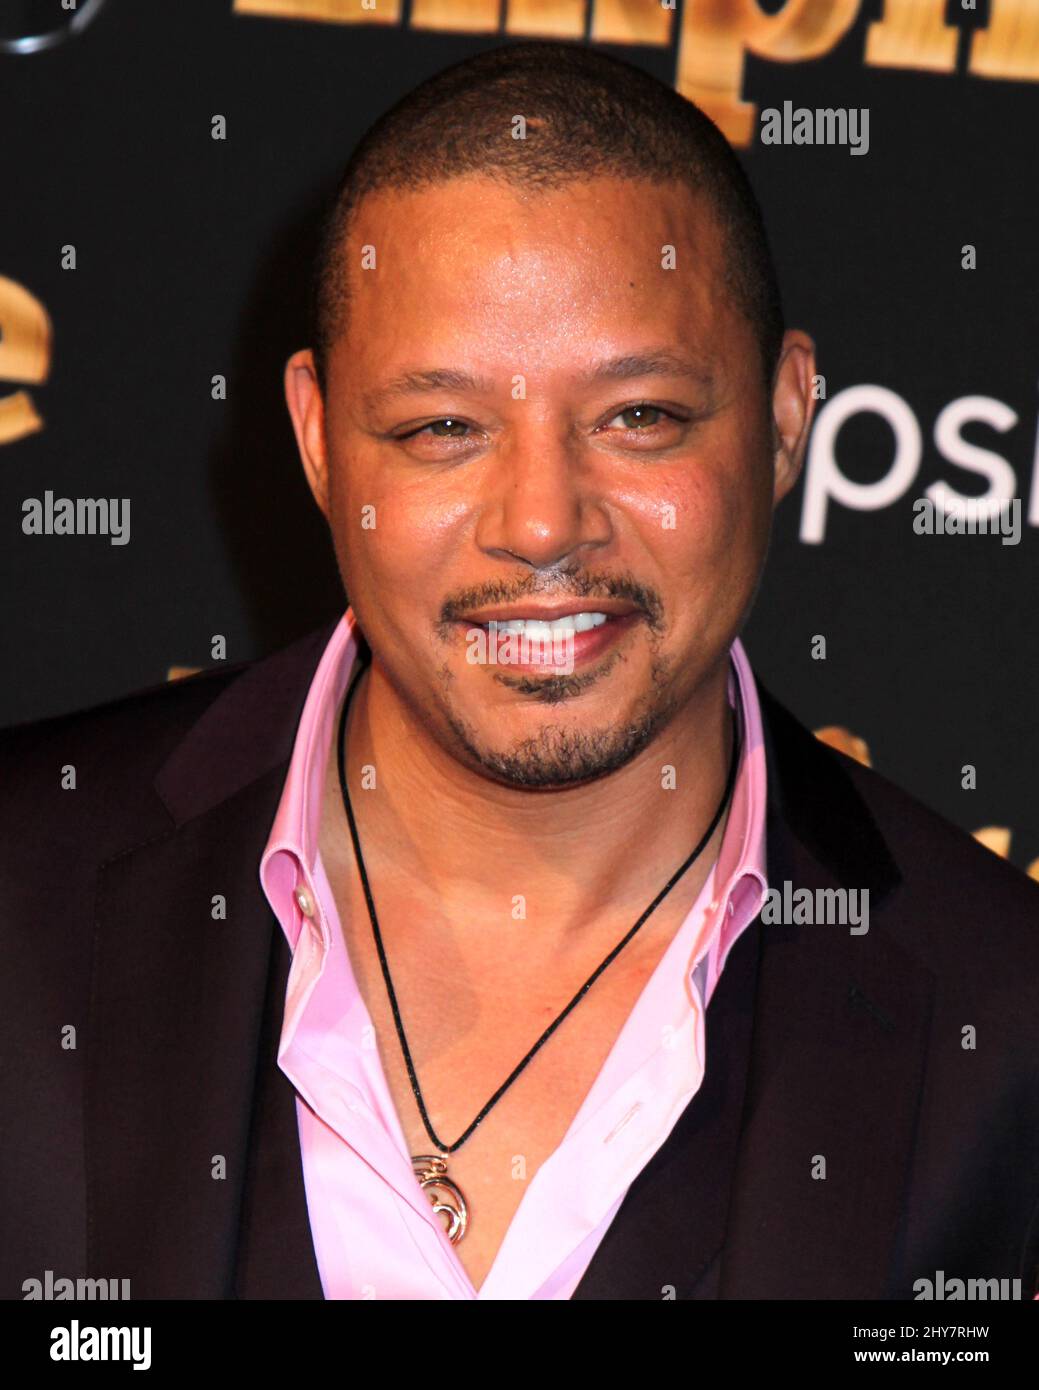 Terrence Howard attending the "Empire" Season 2 Premiere held at Carnegie Hall in New York, USA. Stock Photo